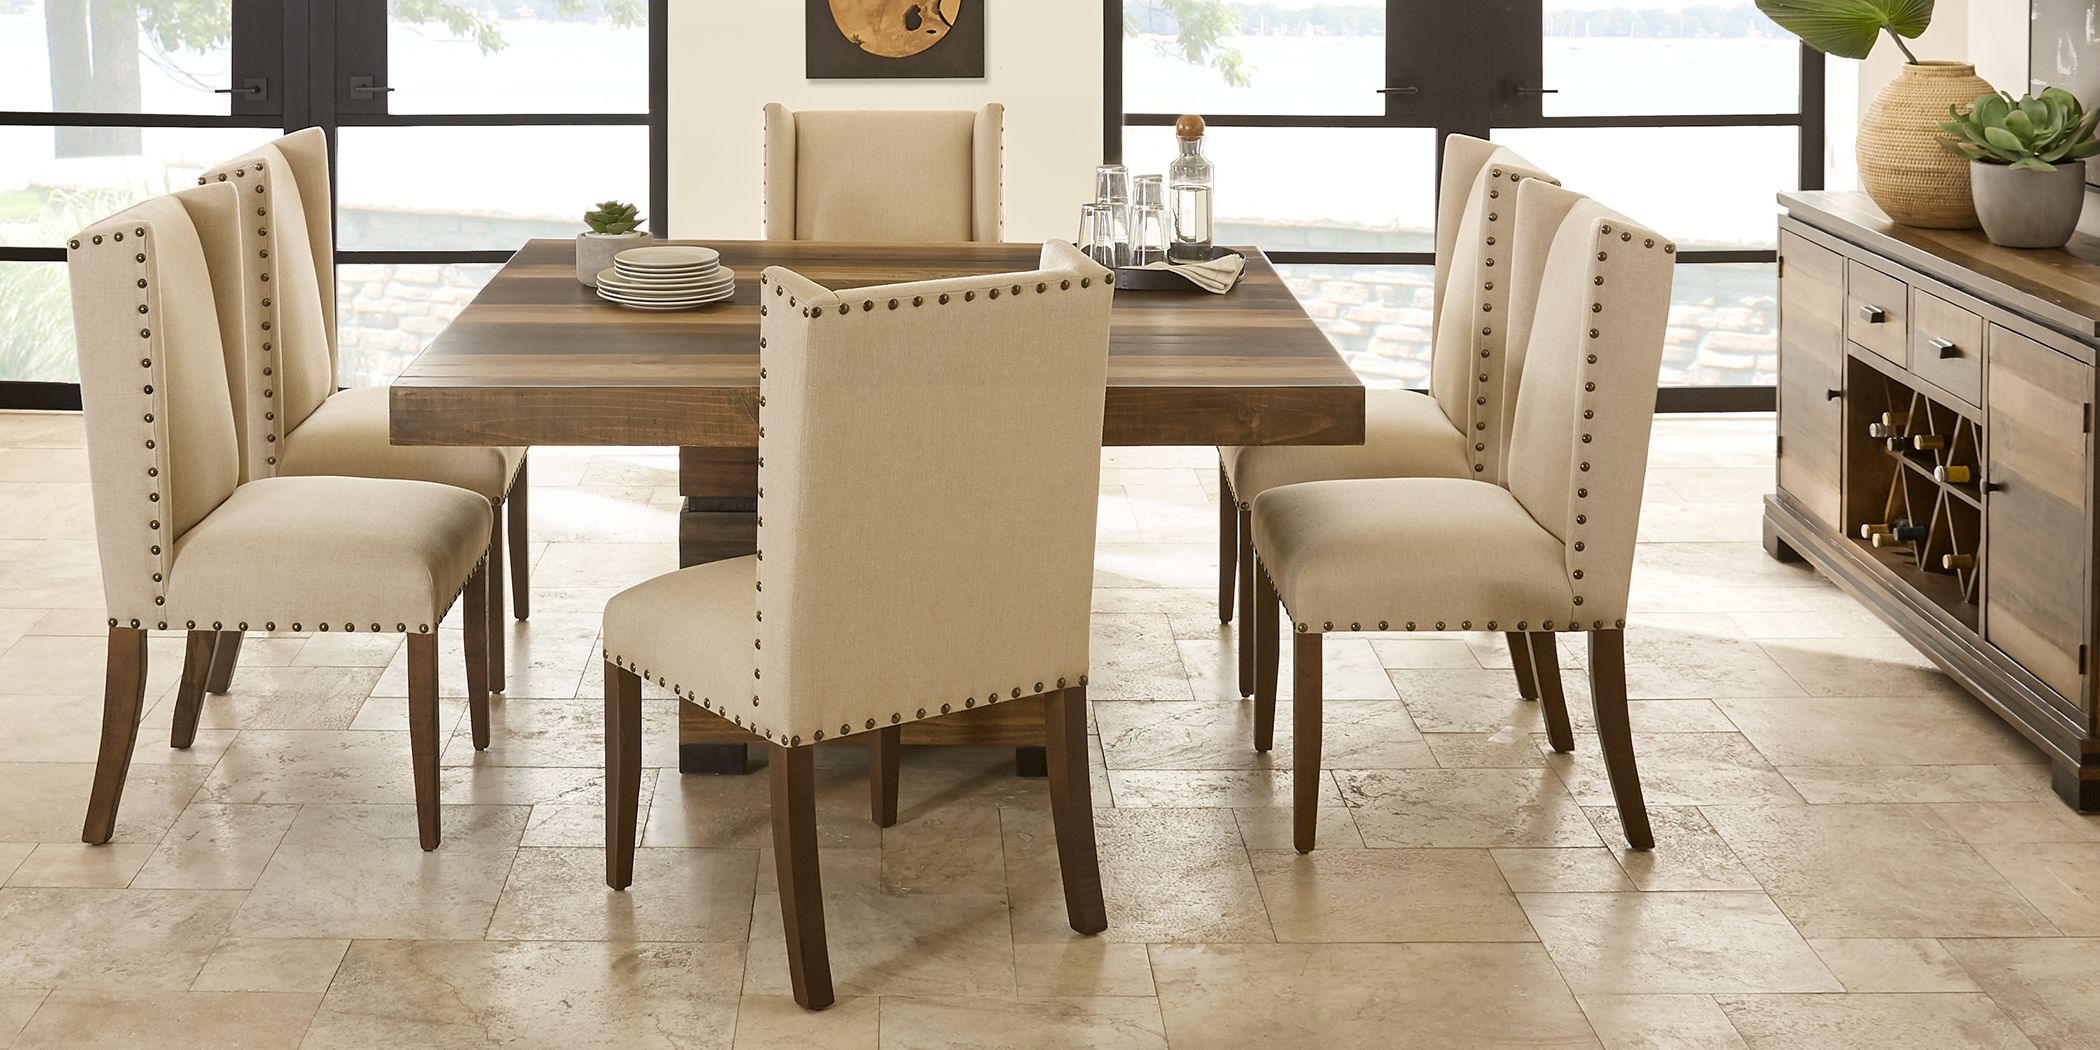 Dining Room Table Chair Sets For Sale